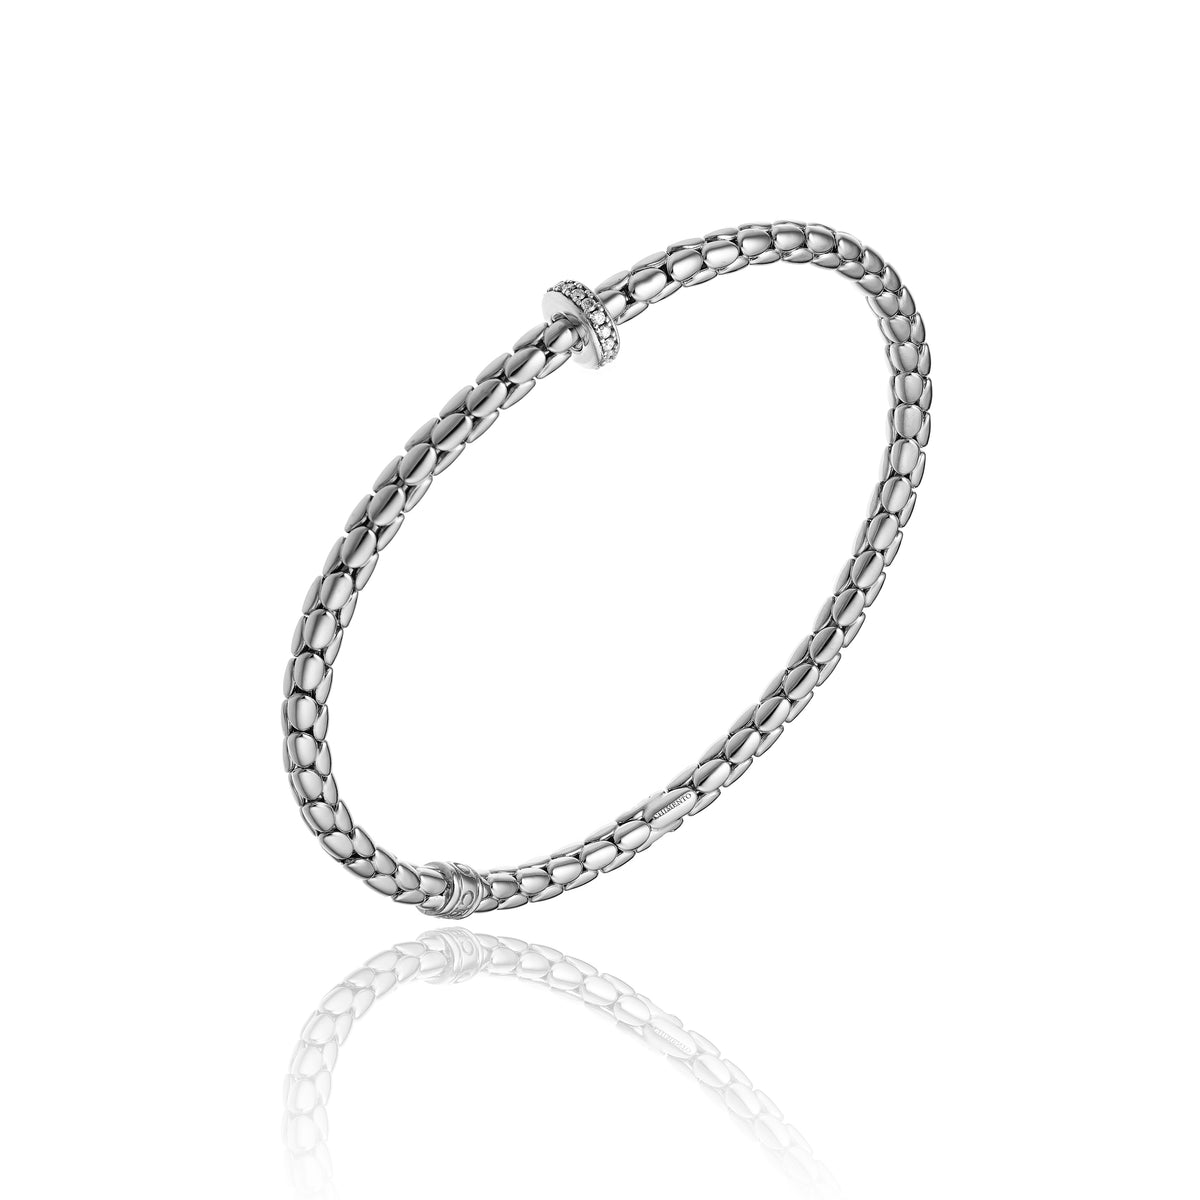 Chimento Stretch Spring Bracelet (Small, 1 Disc) in 18k White Gold with White Diamonds - Orsini Jewellers